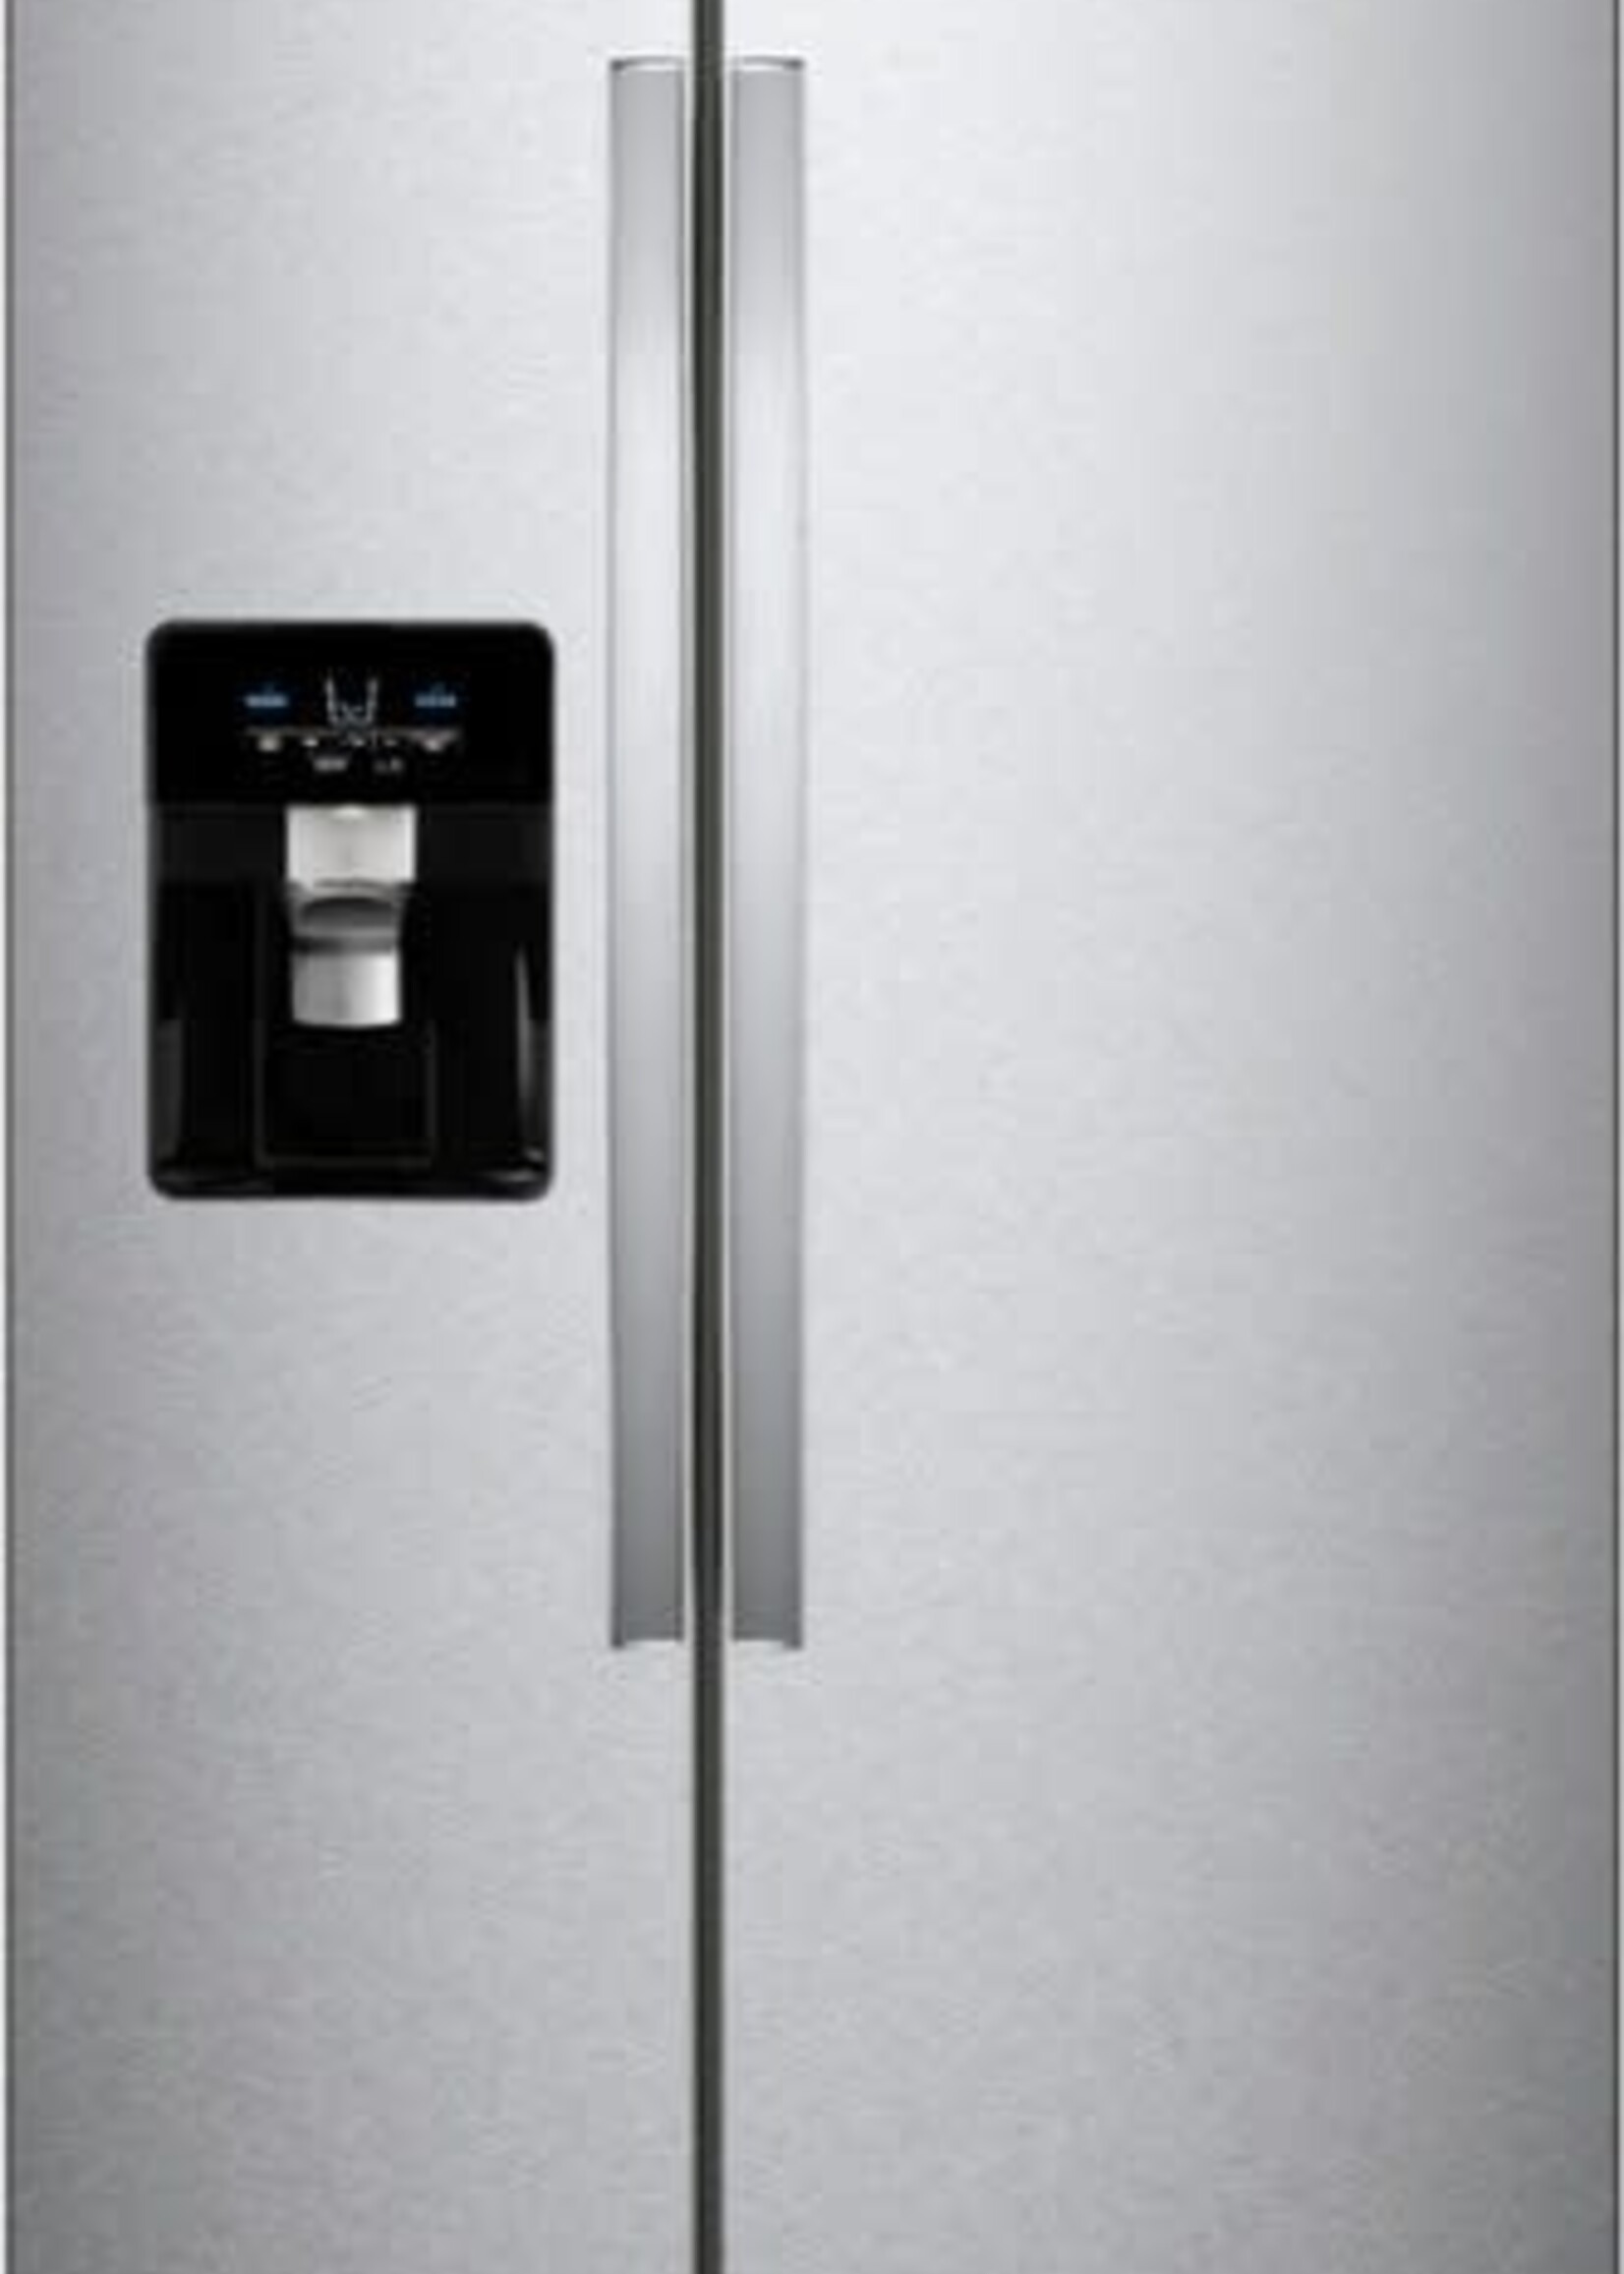 Whirlpool *Whirlpool WRS315SDHZ  24.6-cu ft Side-by-Side Refrigerator with Ice Maker (Fingerprint-Resistant Stainless Steel)